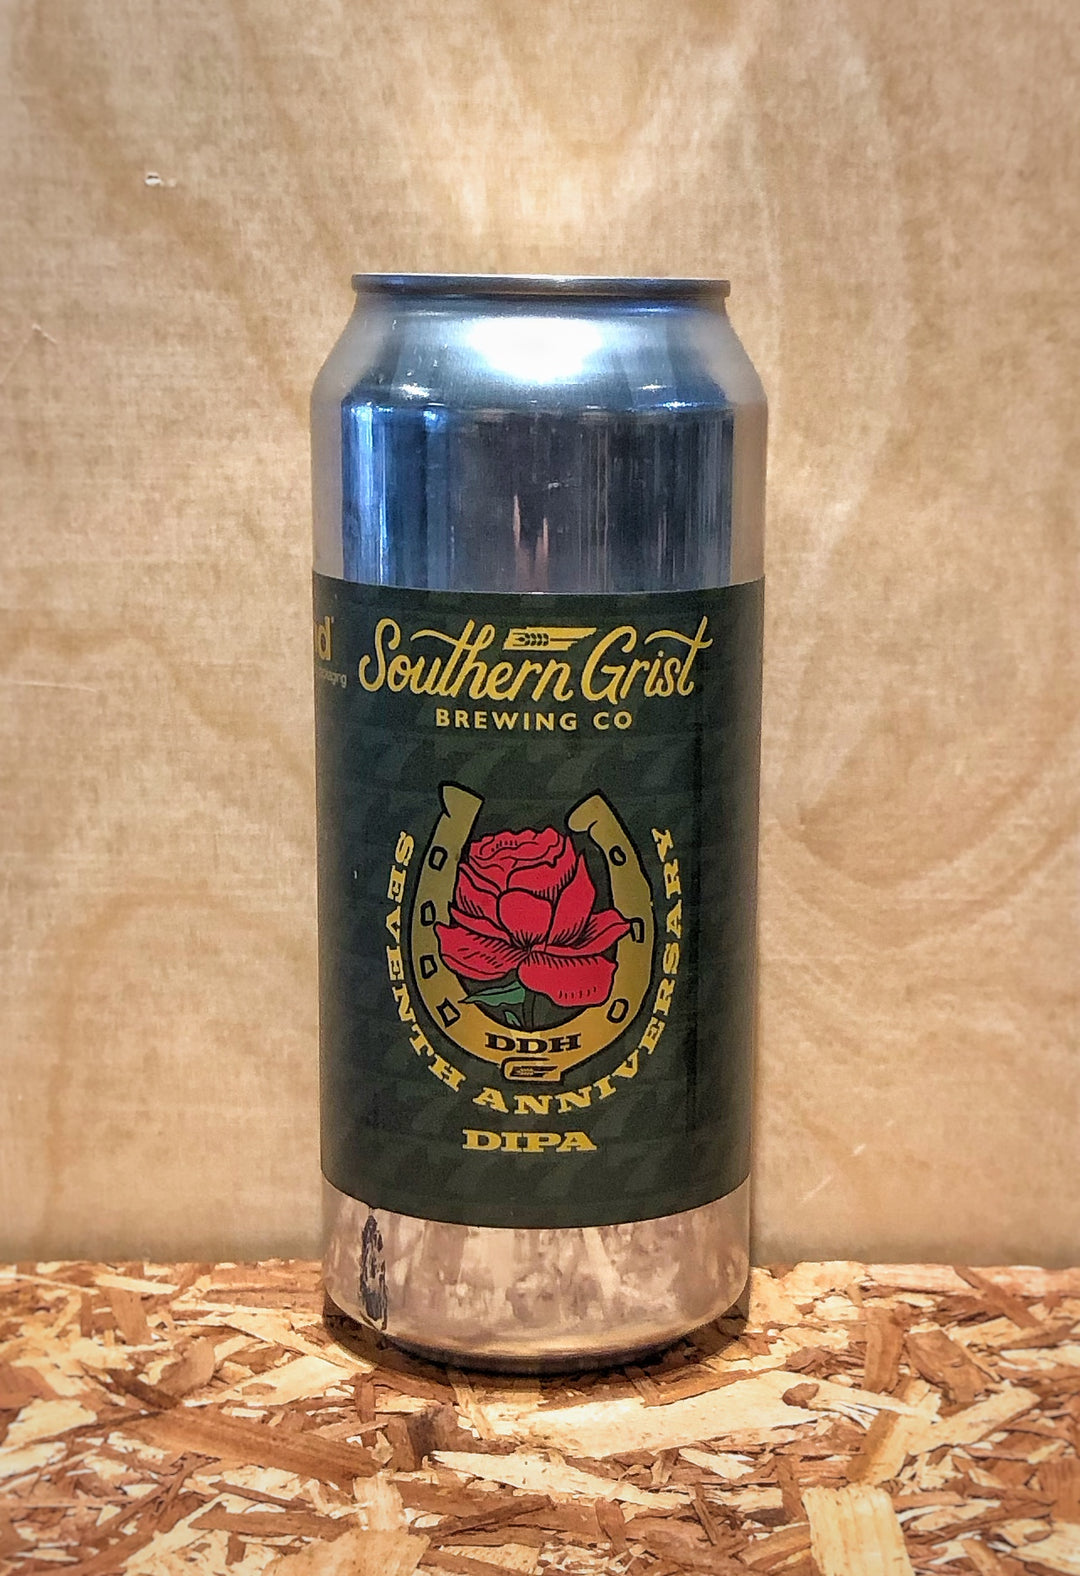 Southern Grist Brewing Co. 'Seventh Anniversary' DDH Double IPA (Nashville, TN)